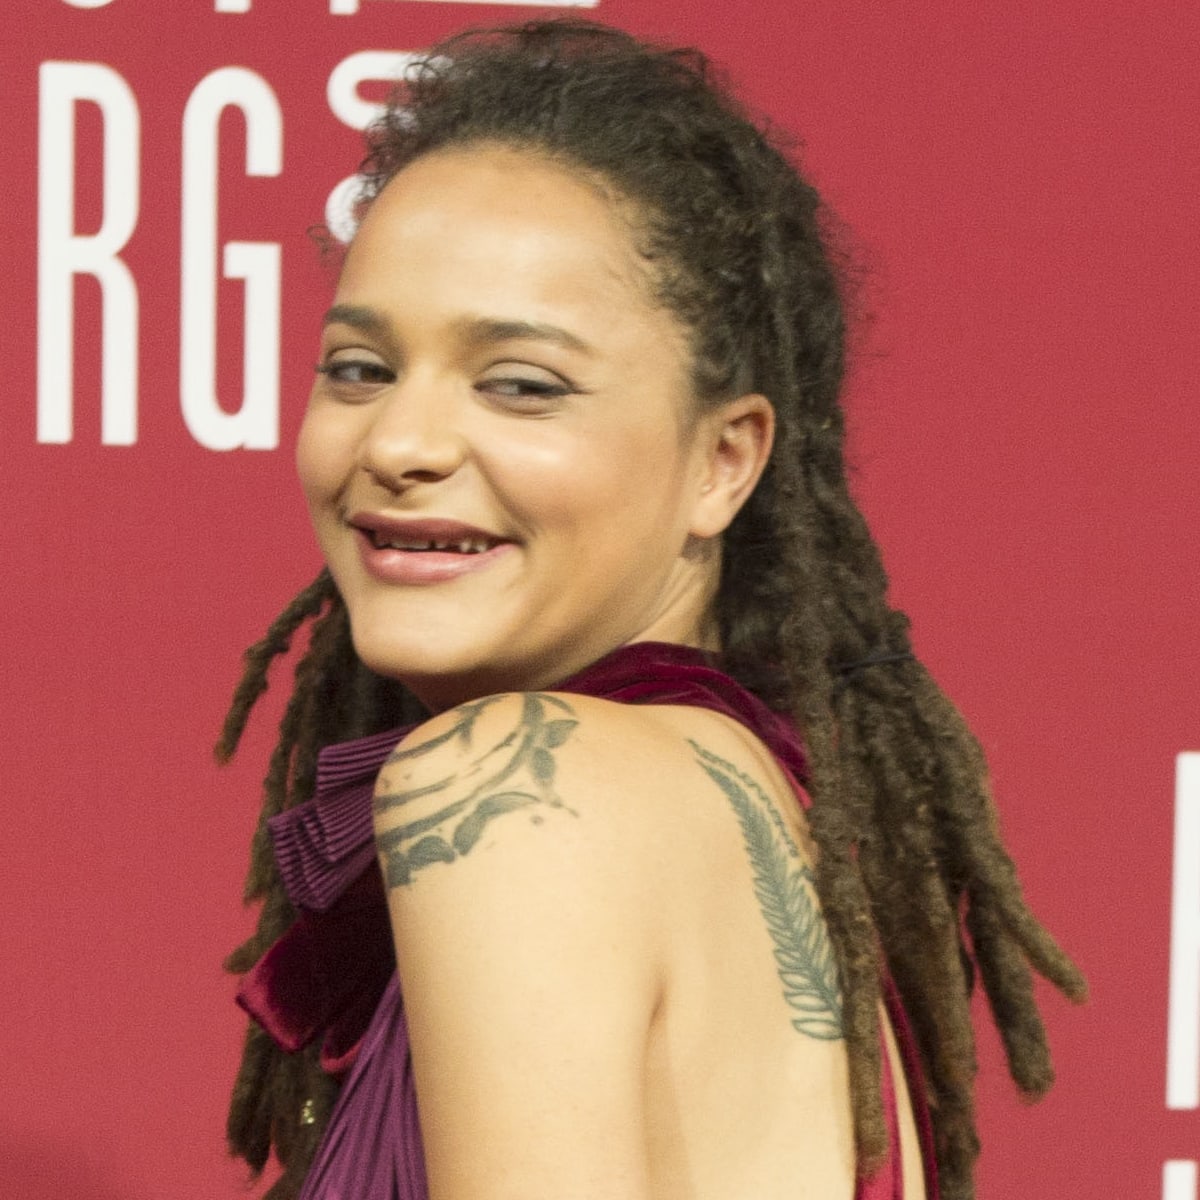 Sasha Lane settled in Frisco, Texas, after her parents divorced when she was young